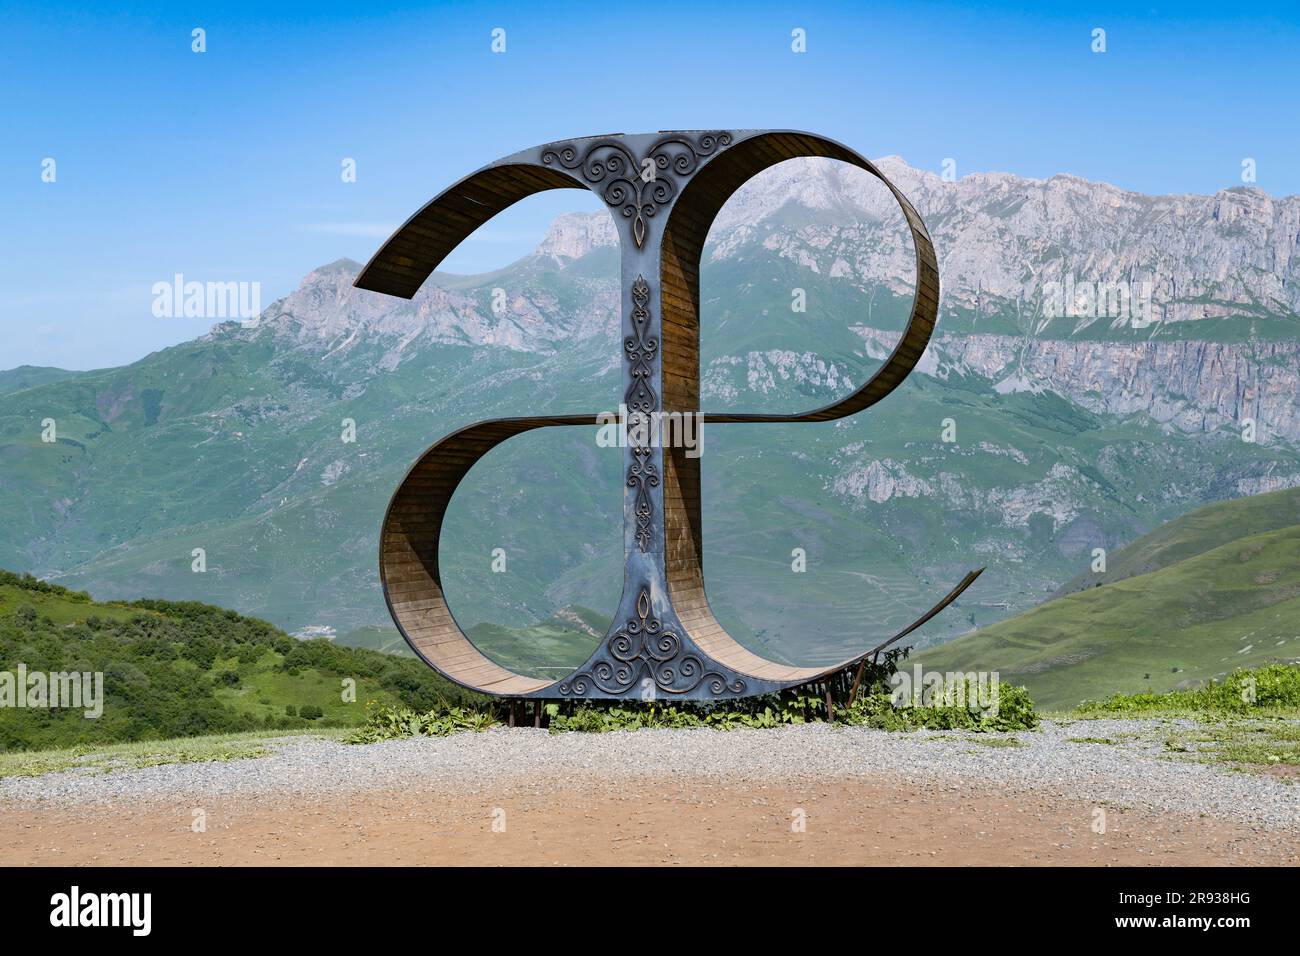 FAZIKAU, RUSSIA - JUNE 13, 2023: Art object of the 'AE - the letter of the Ossetian alphabet' close-up on a sunny June day. North Ossetia Alania Stock Photo